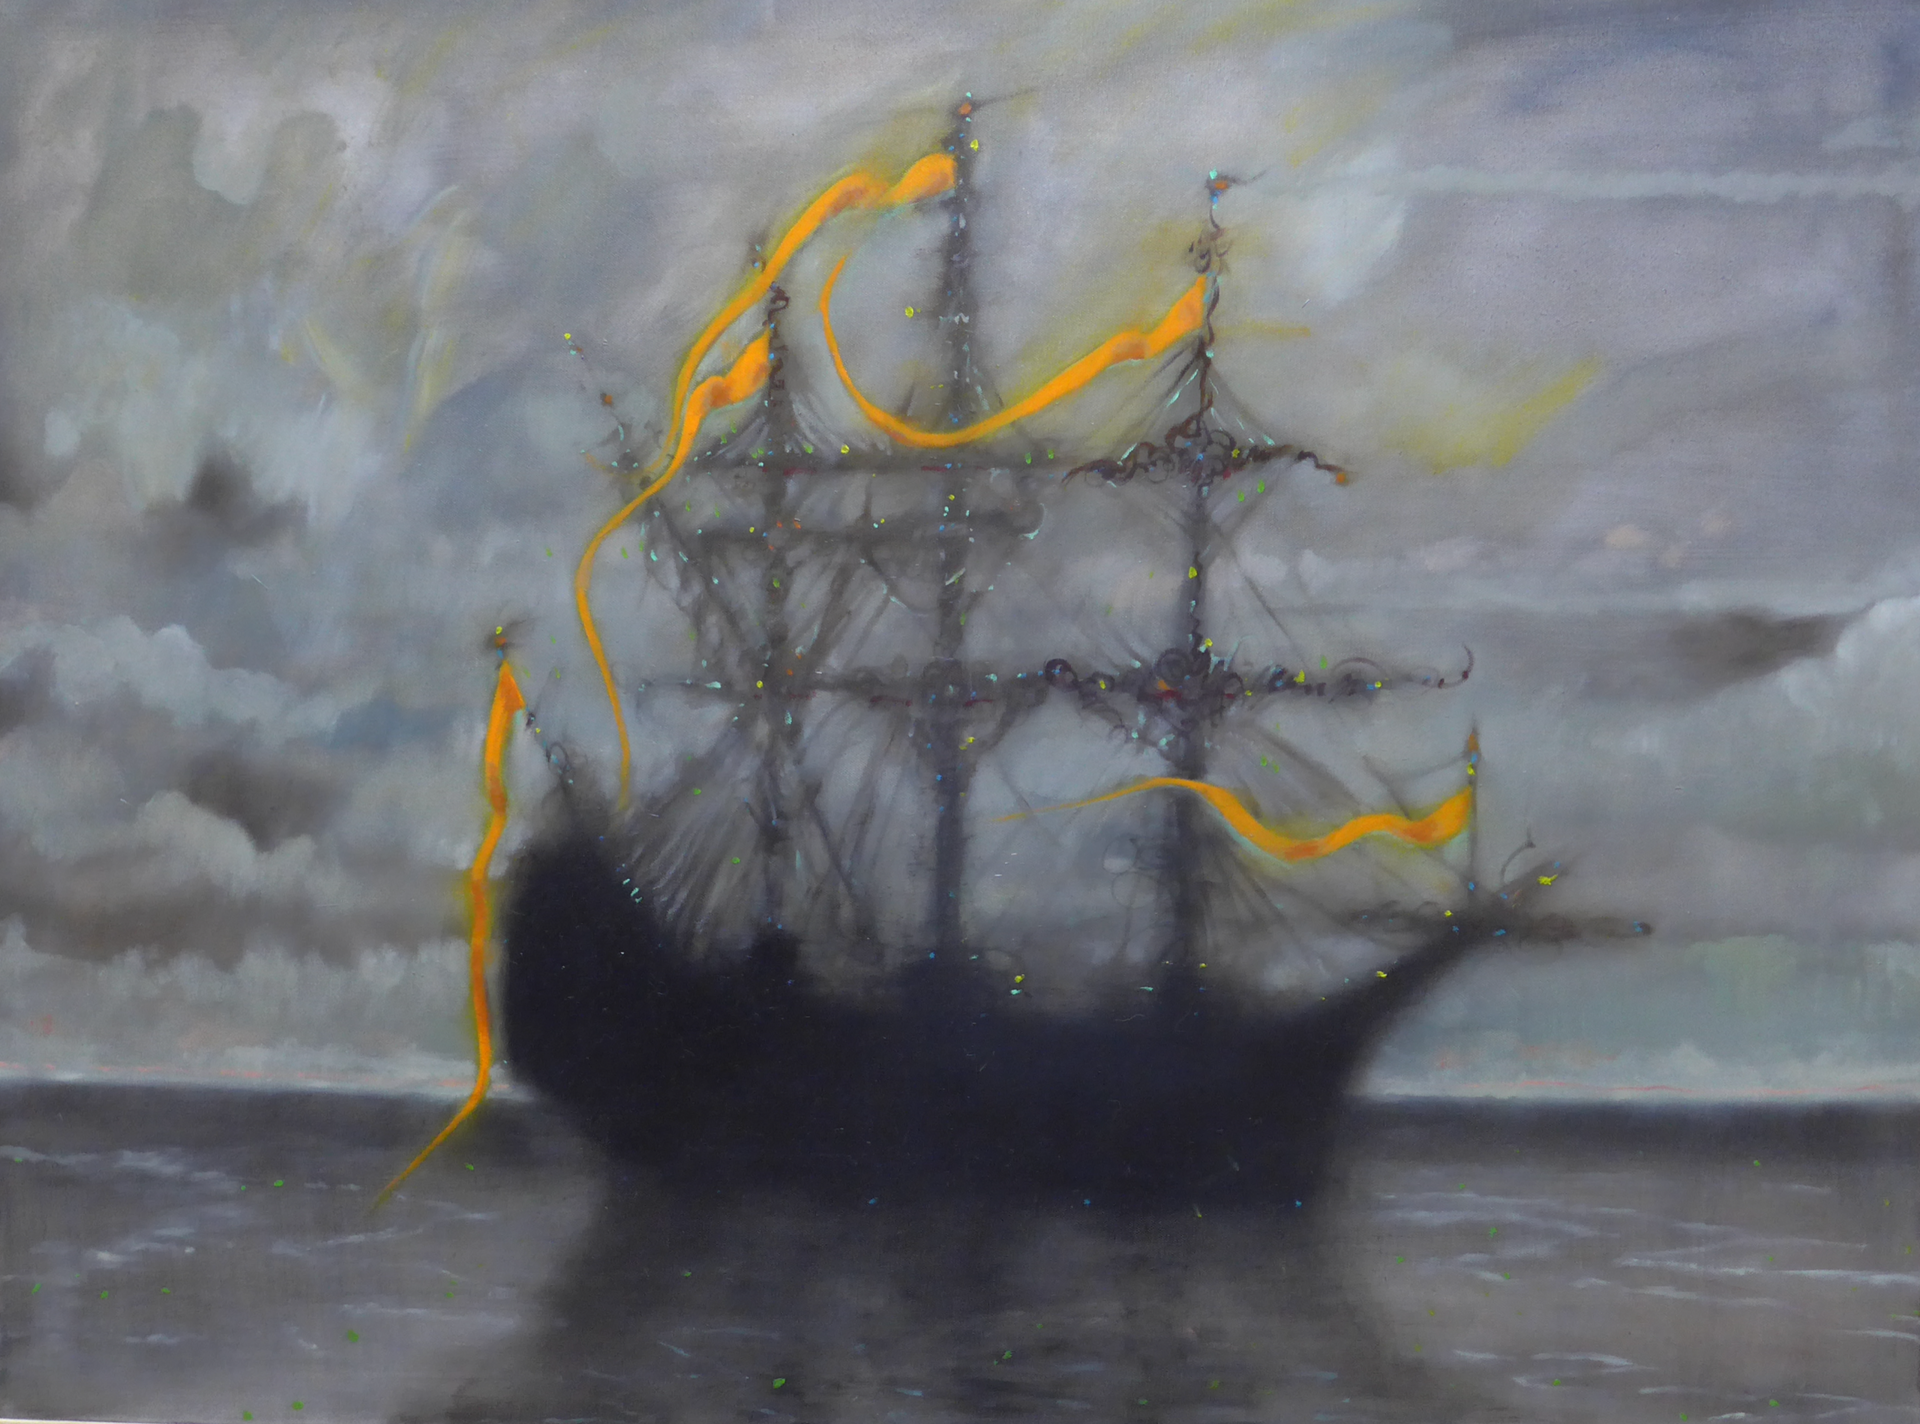 The Dutch Ghost Ship by Tim Anderson